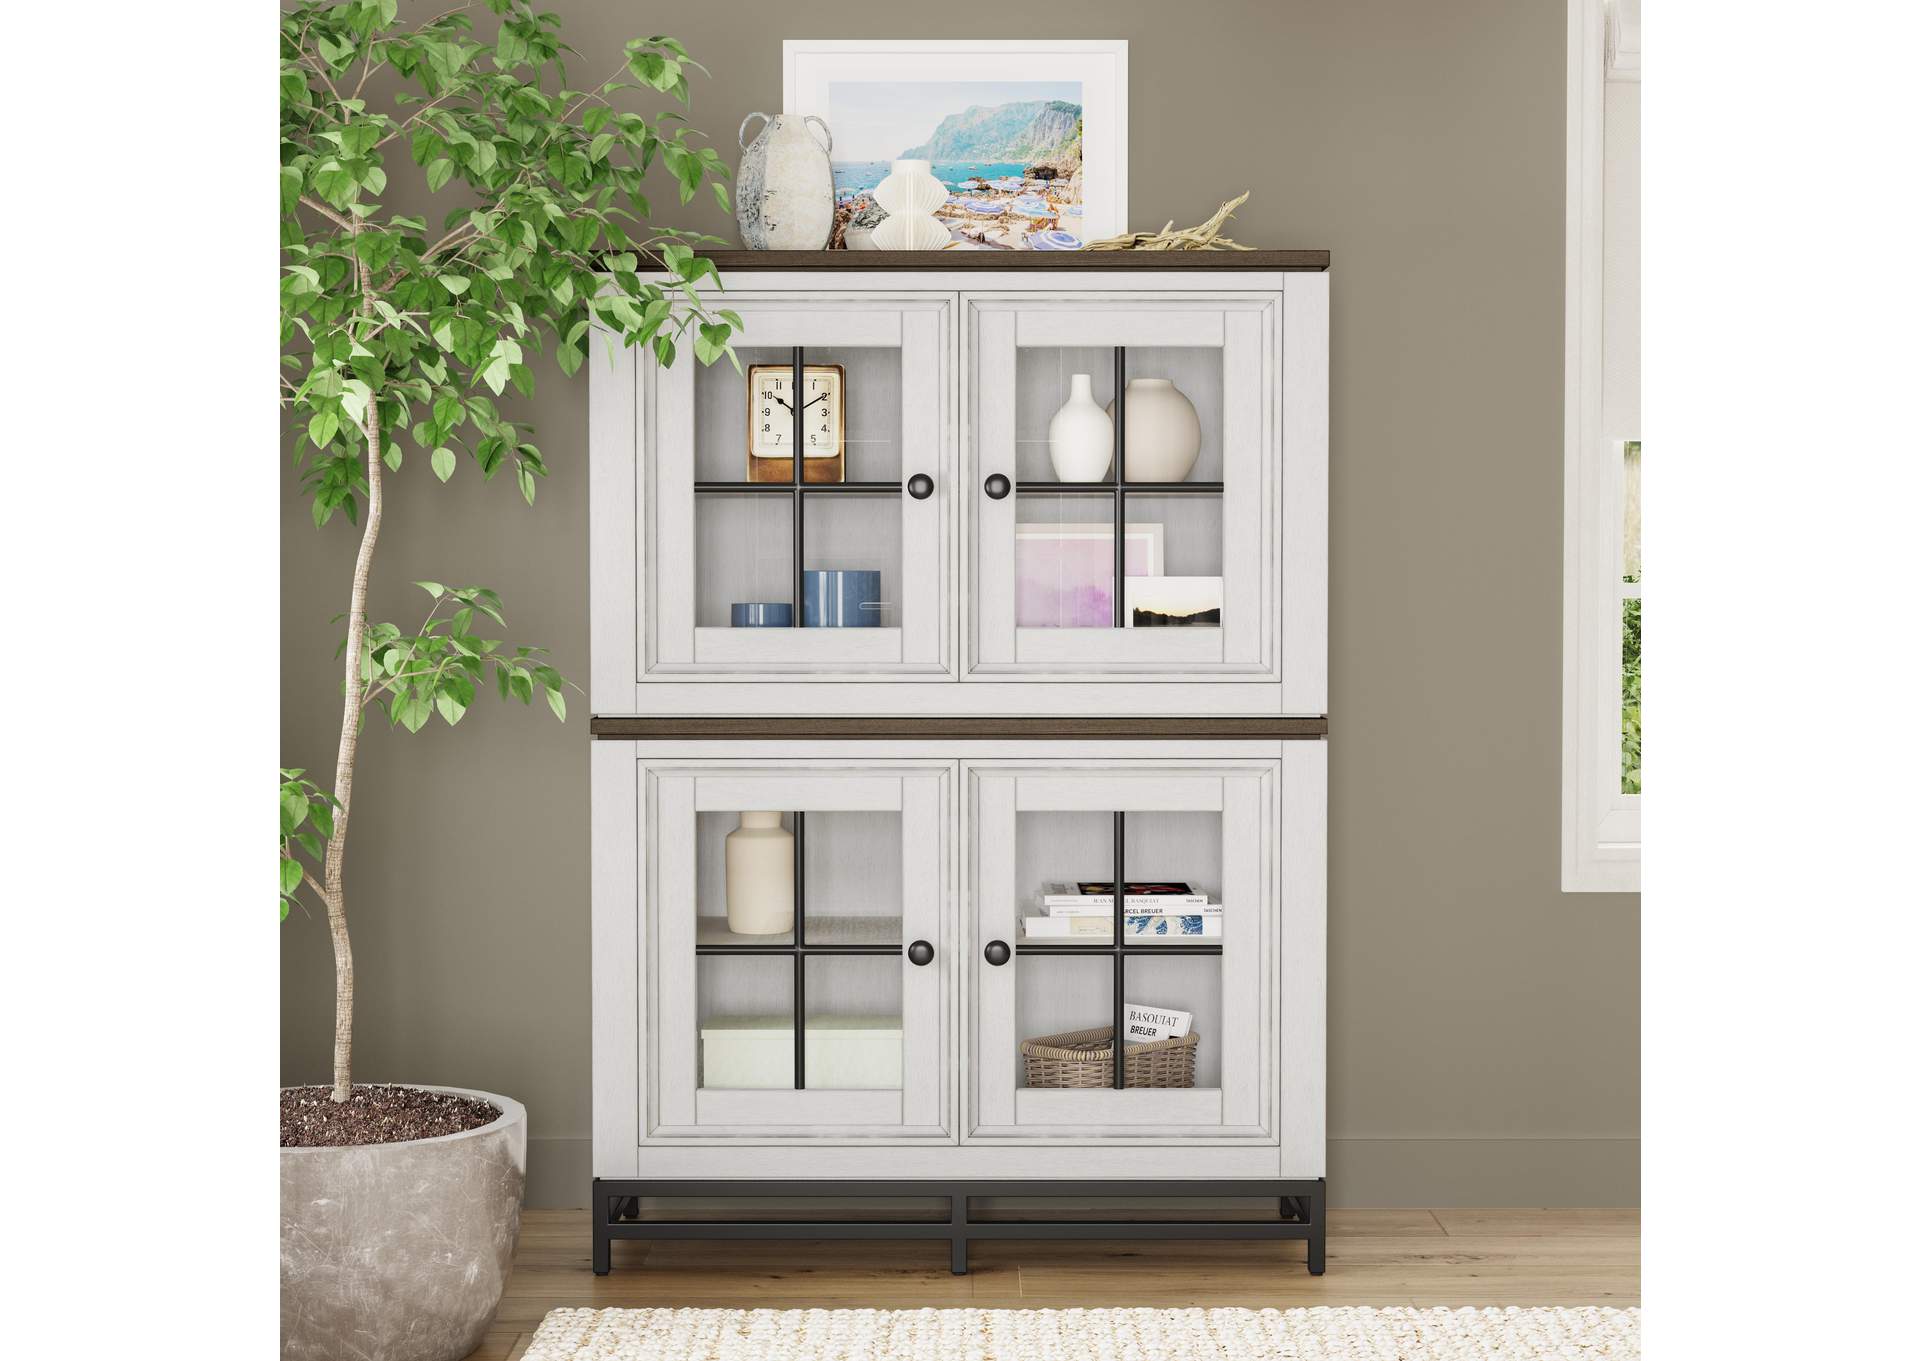 Melody Stacking Bookcase,Flexsteel